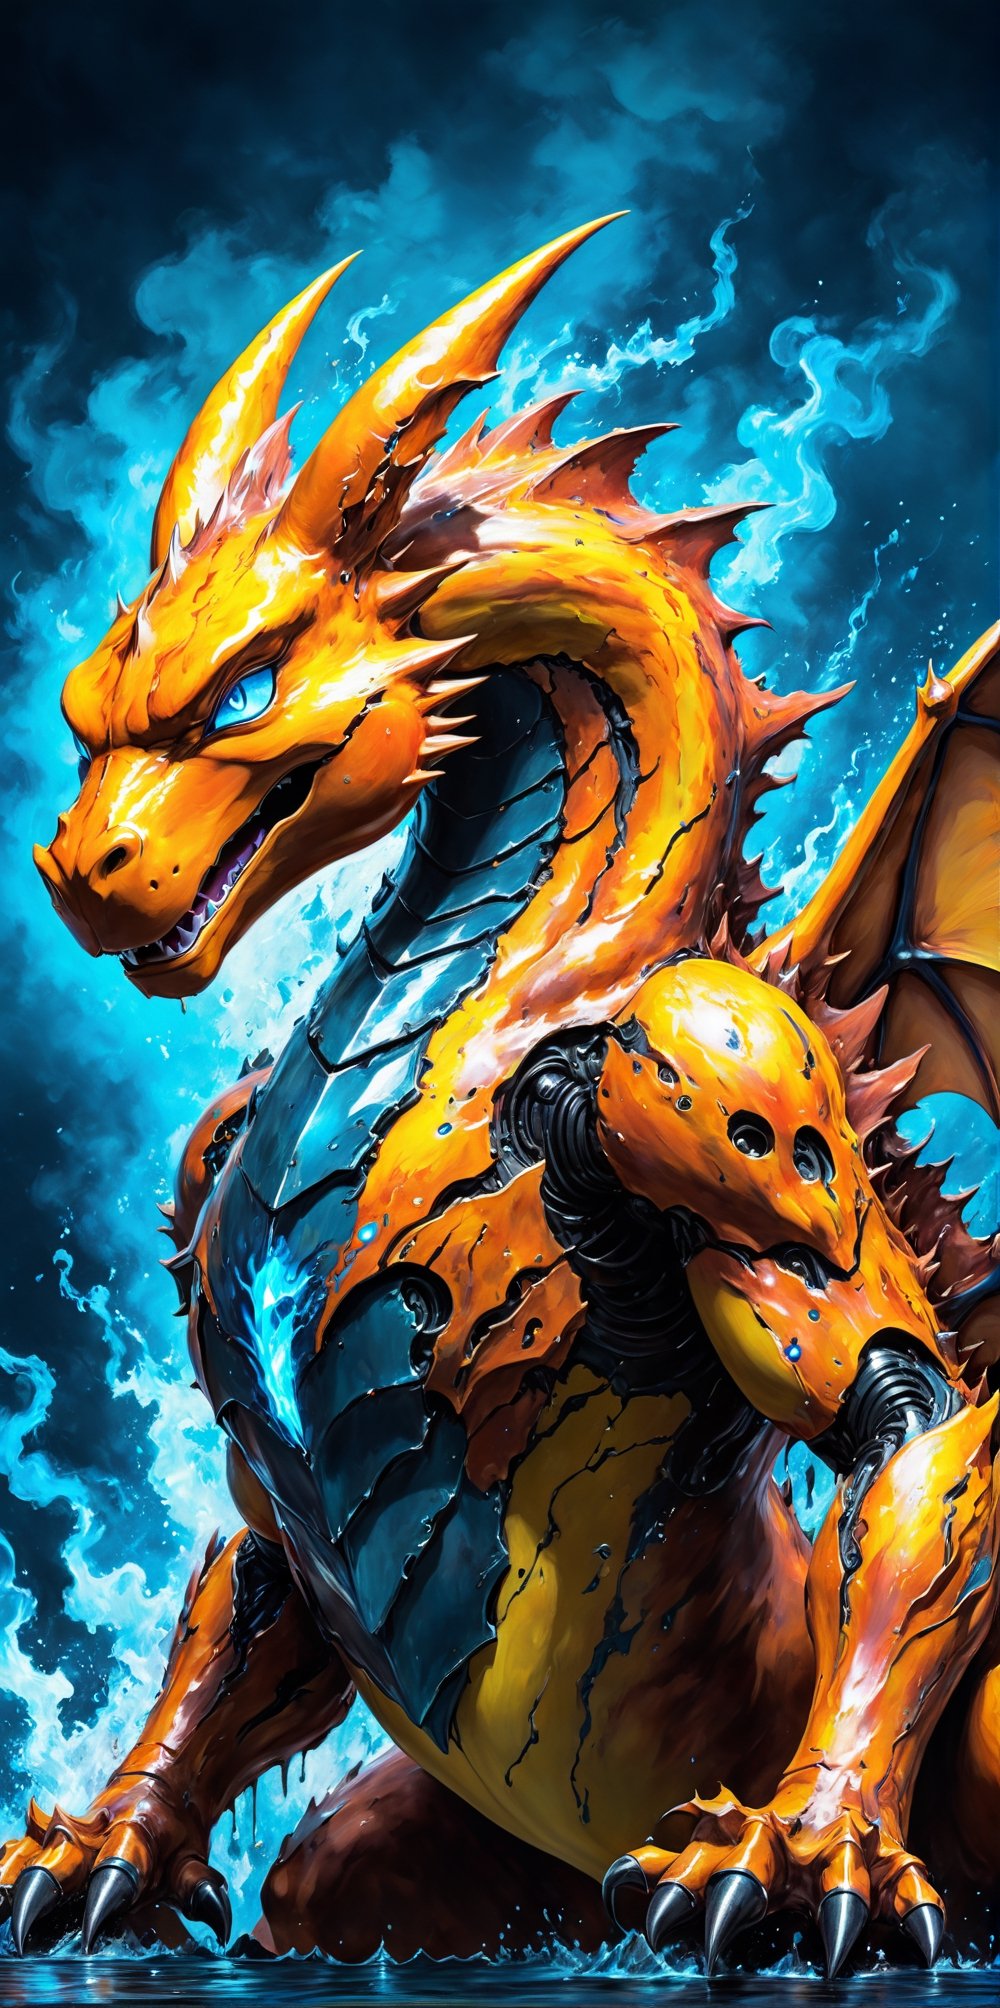 Render Charizard from Pokemon. 

photorealistic,  seeBlack ink flow: 8k resolution photorealistic masterpiece, intricately detailed fluid gouache painting, by Jean Baptiste Mongue, calligraphy, acrylic: colorful watercolor art, cinematic lighting, maximalist photoillustration, 8k, HD, resolution concept art intricately detailed, complex, elegant, expansive, fantastical, psychedelic realism, dripping paint,cyborg style,steampunk style,cyborg,android,steampunk,Movie Still, salvadordalistyle, noise reducer,